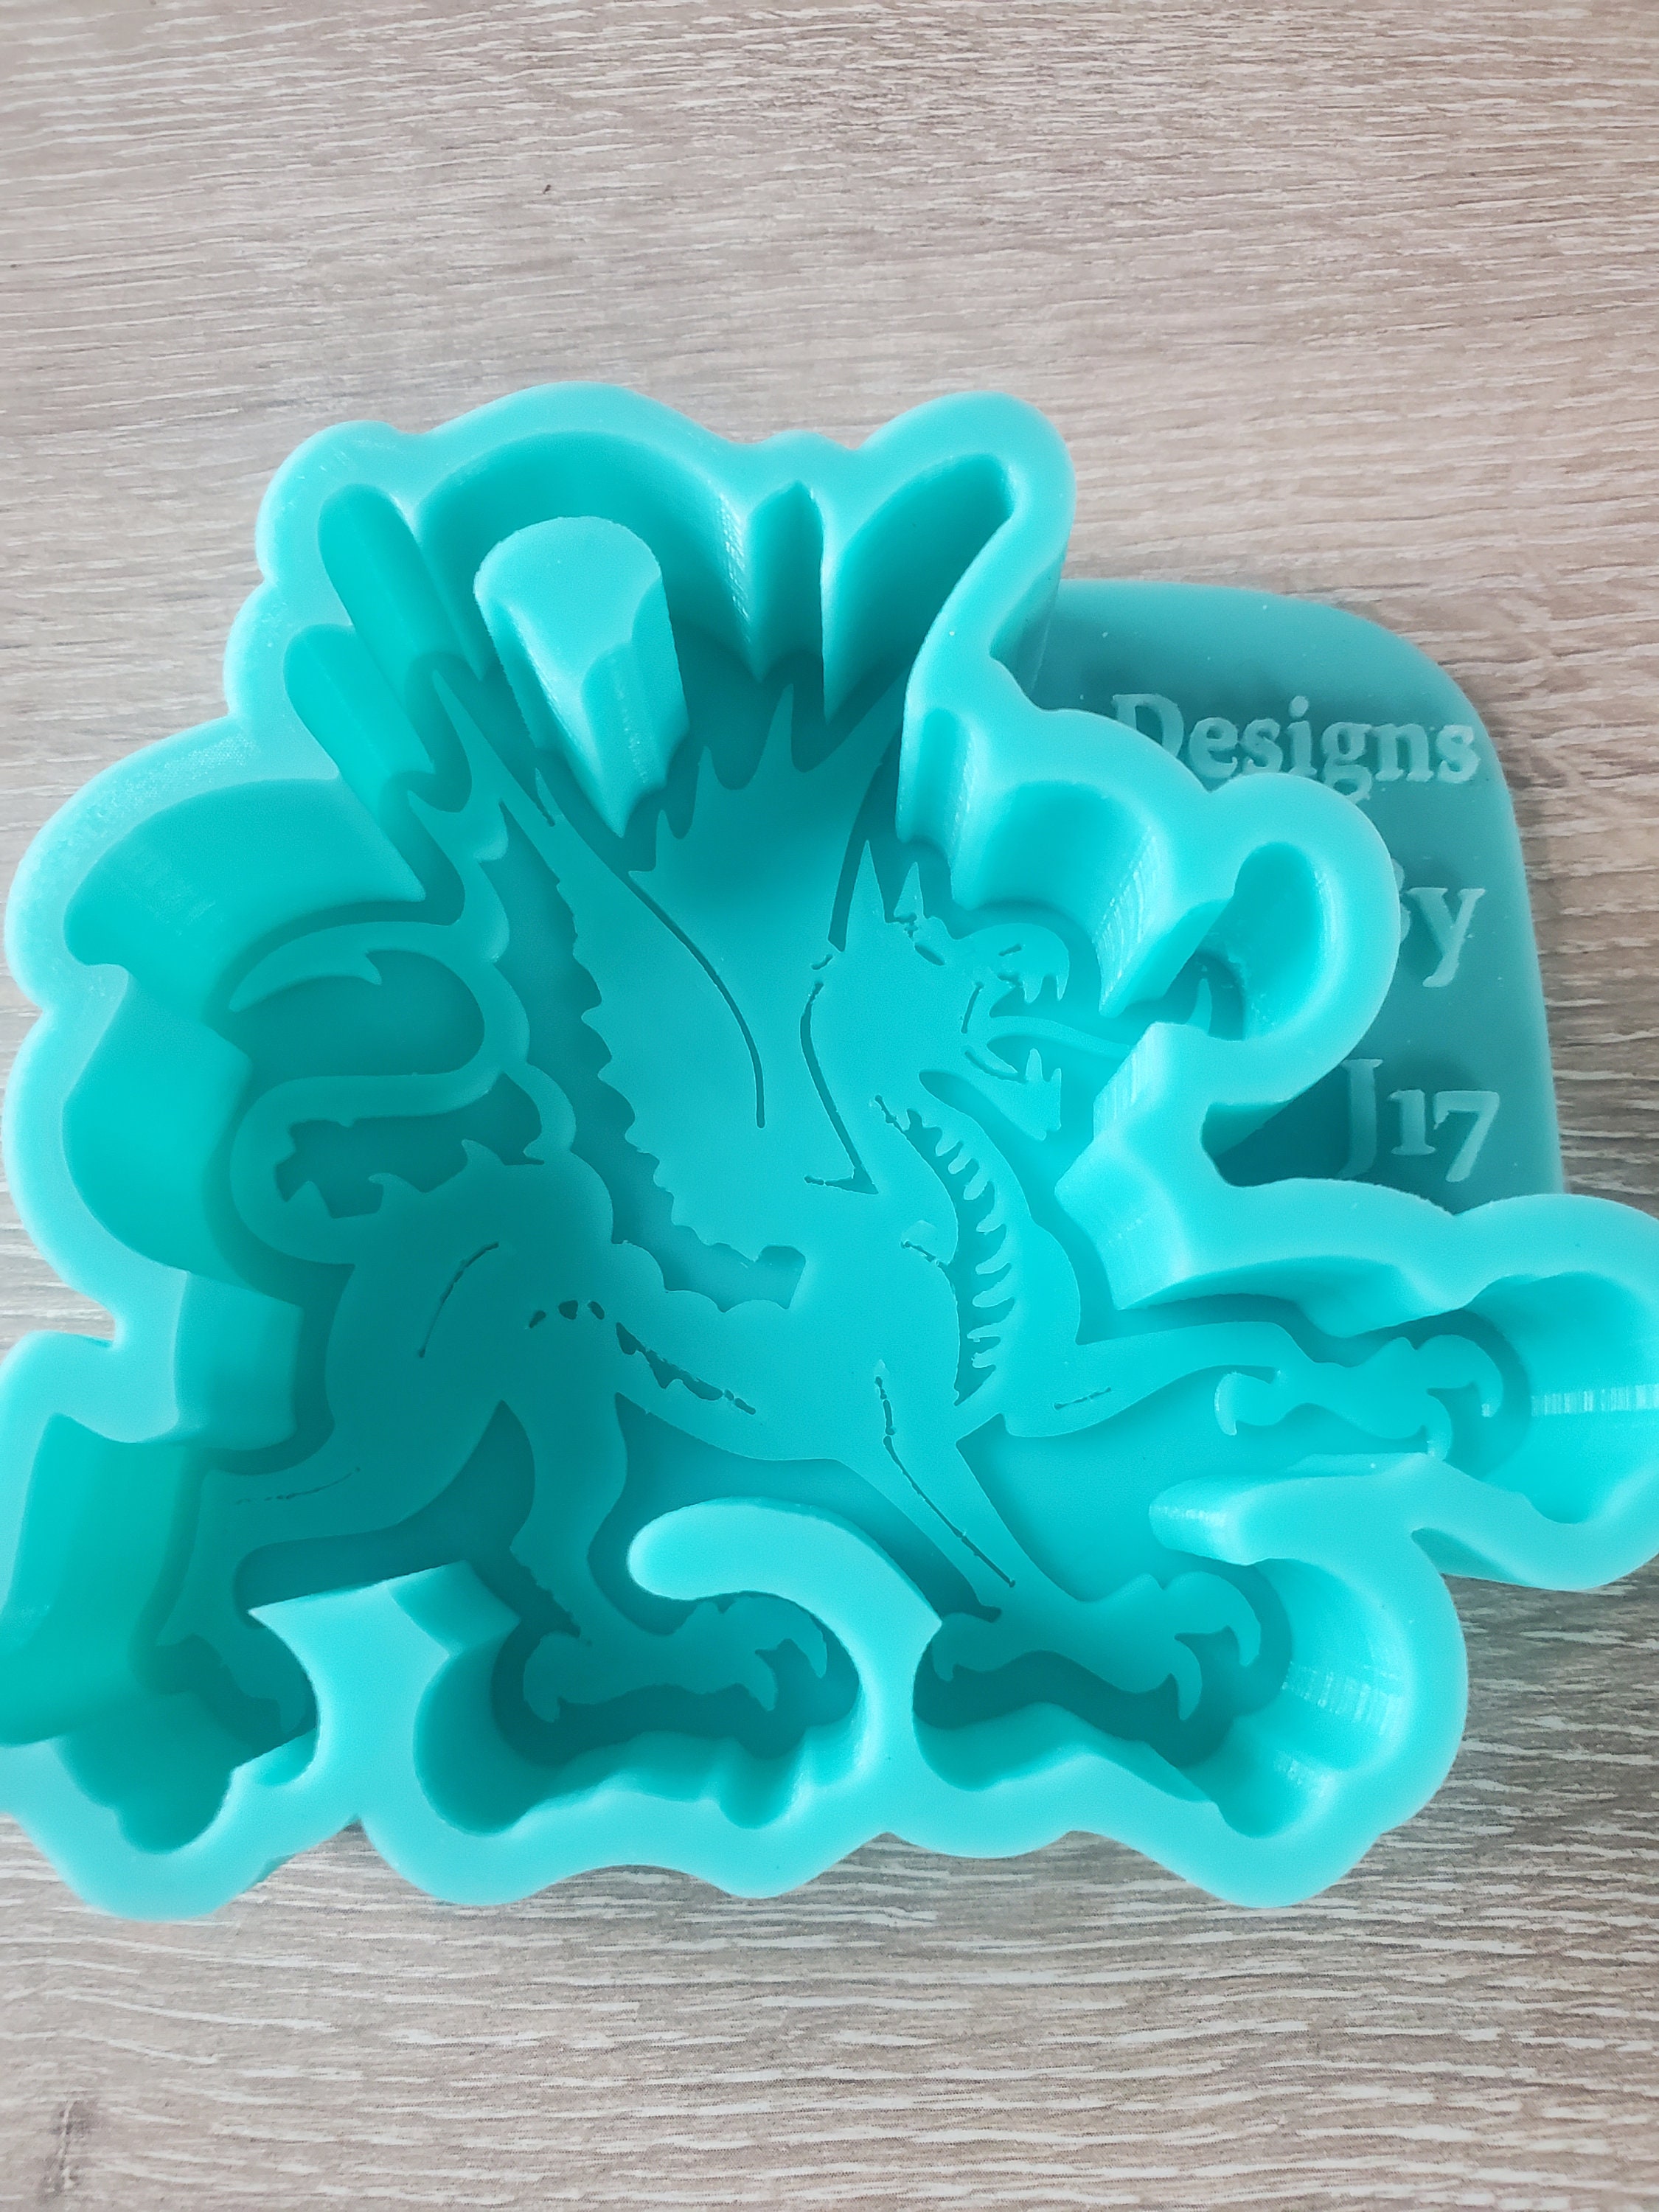 Dragon silicone mould (mold) - 'Chinese Dragon (Left)' by FPC Sugarcraft |  resin mold, fimo mold, polymer clay mold, soapmaking mold C075